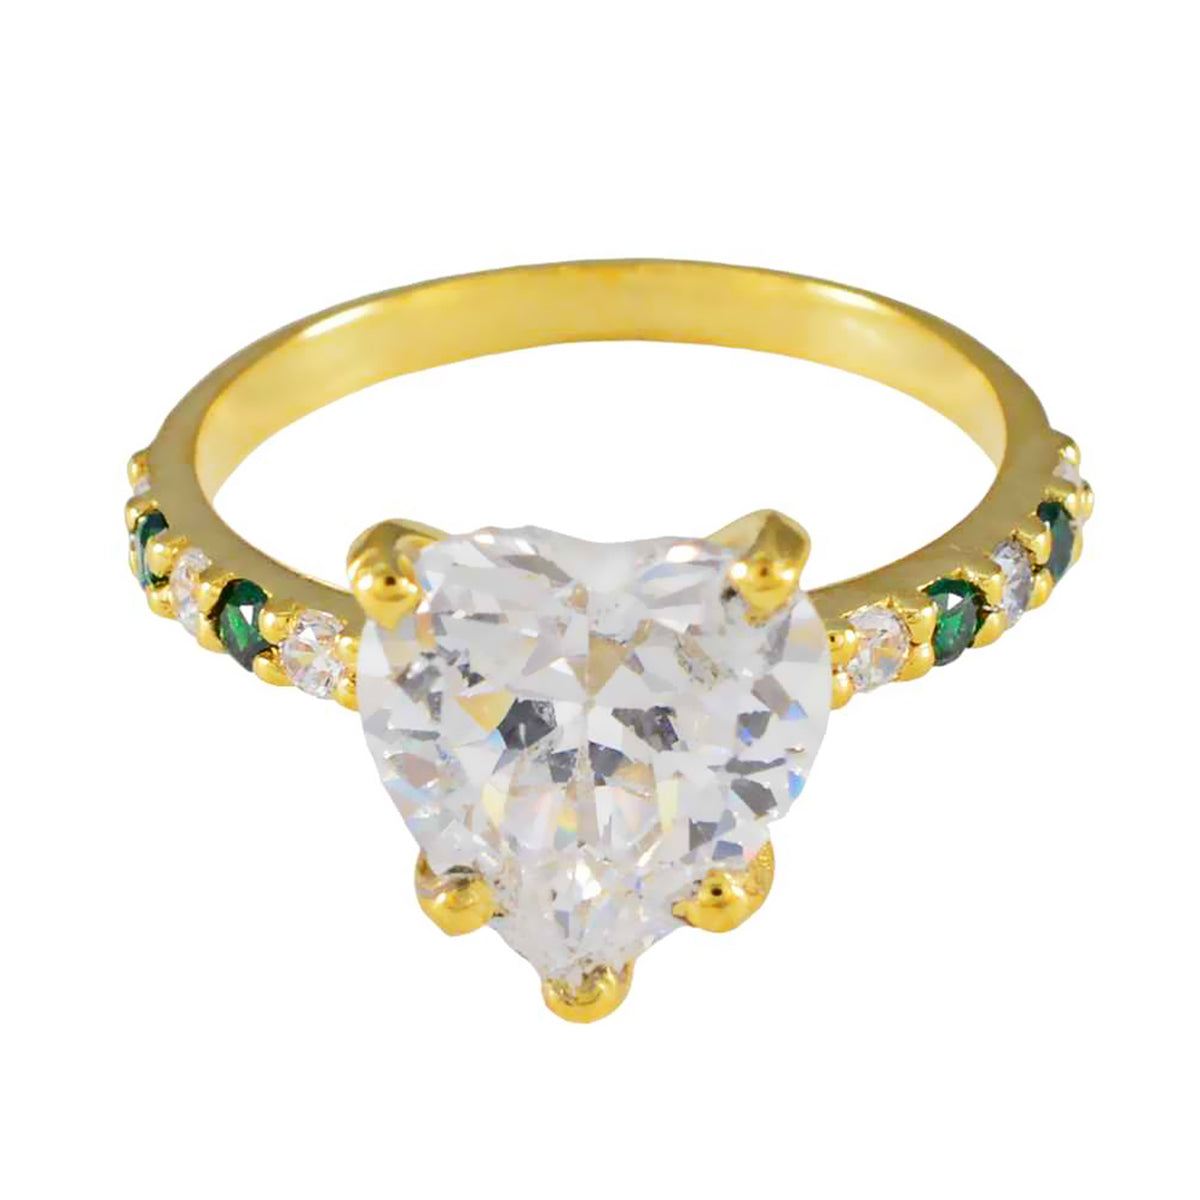 Riyo In Bulk Silver Ring With Yellow Gold Plating Emerald CZ Stone Heart Shape Prong Setting Stylish Jewelry Cocktail Ring